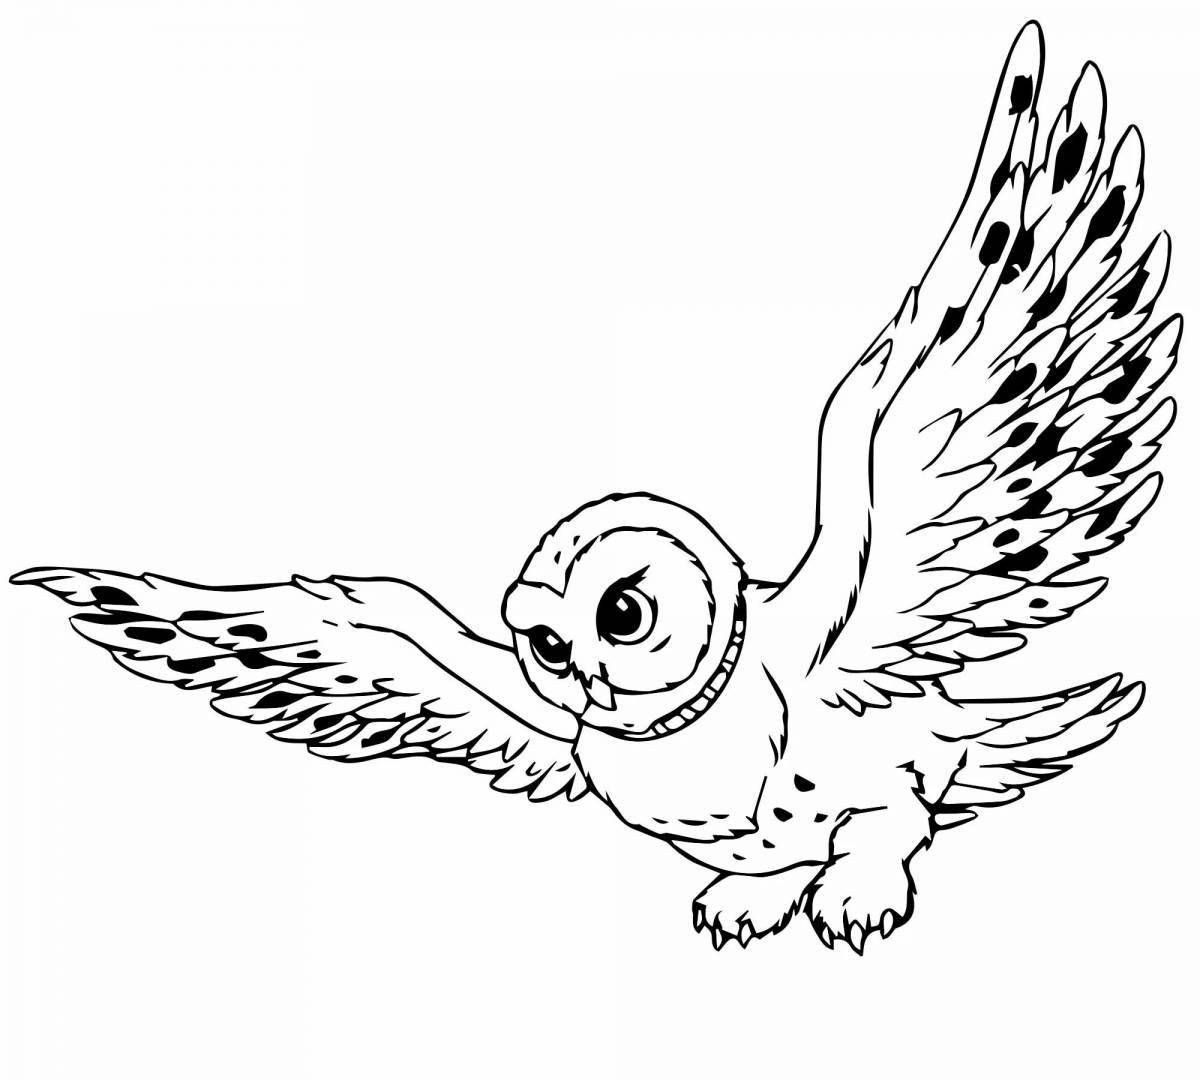 Harry potter spicy owl coloring book